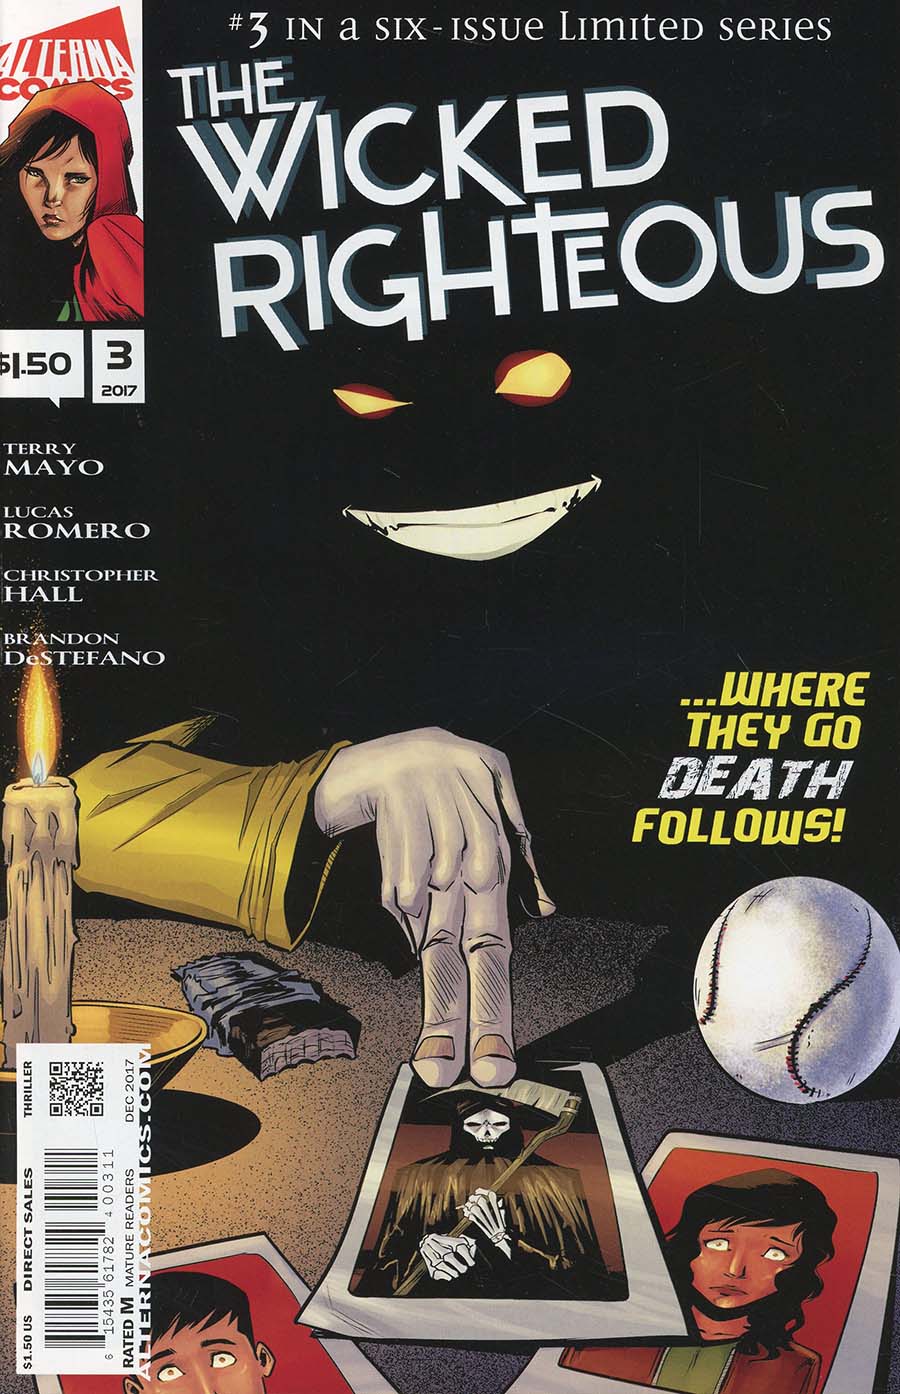 Wicked Righteous #3